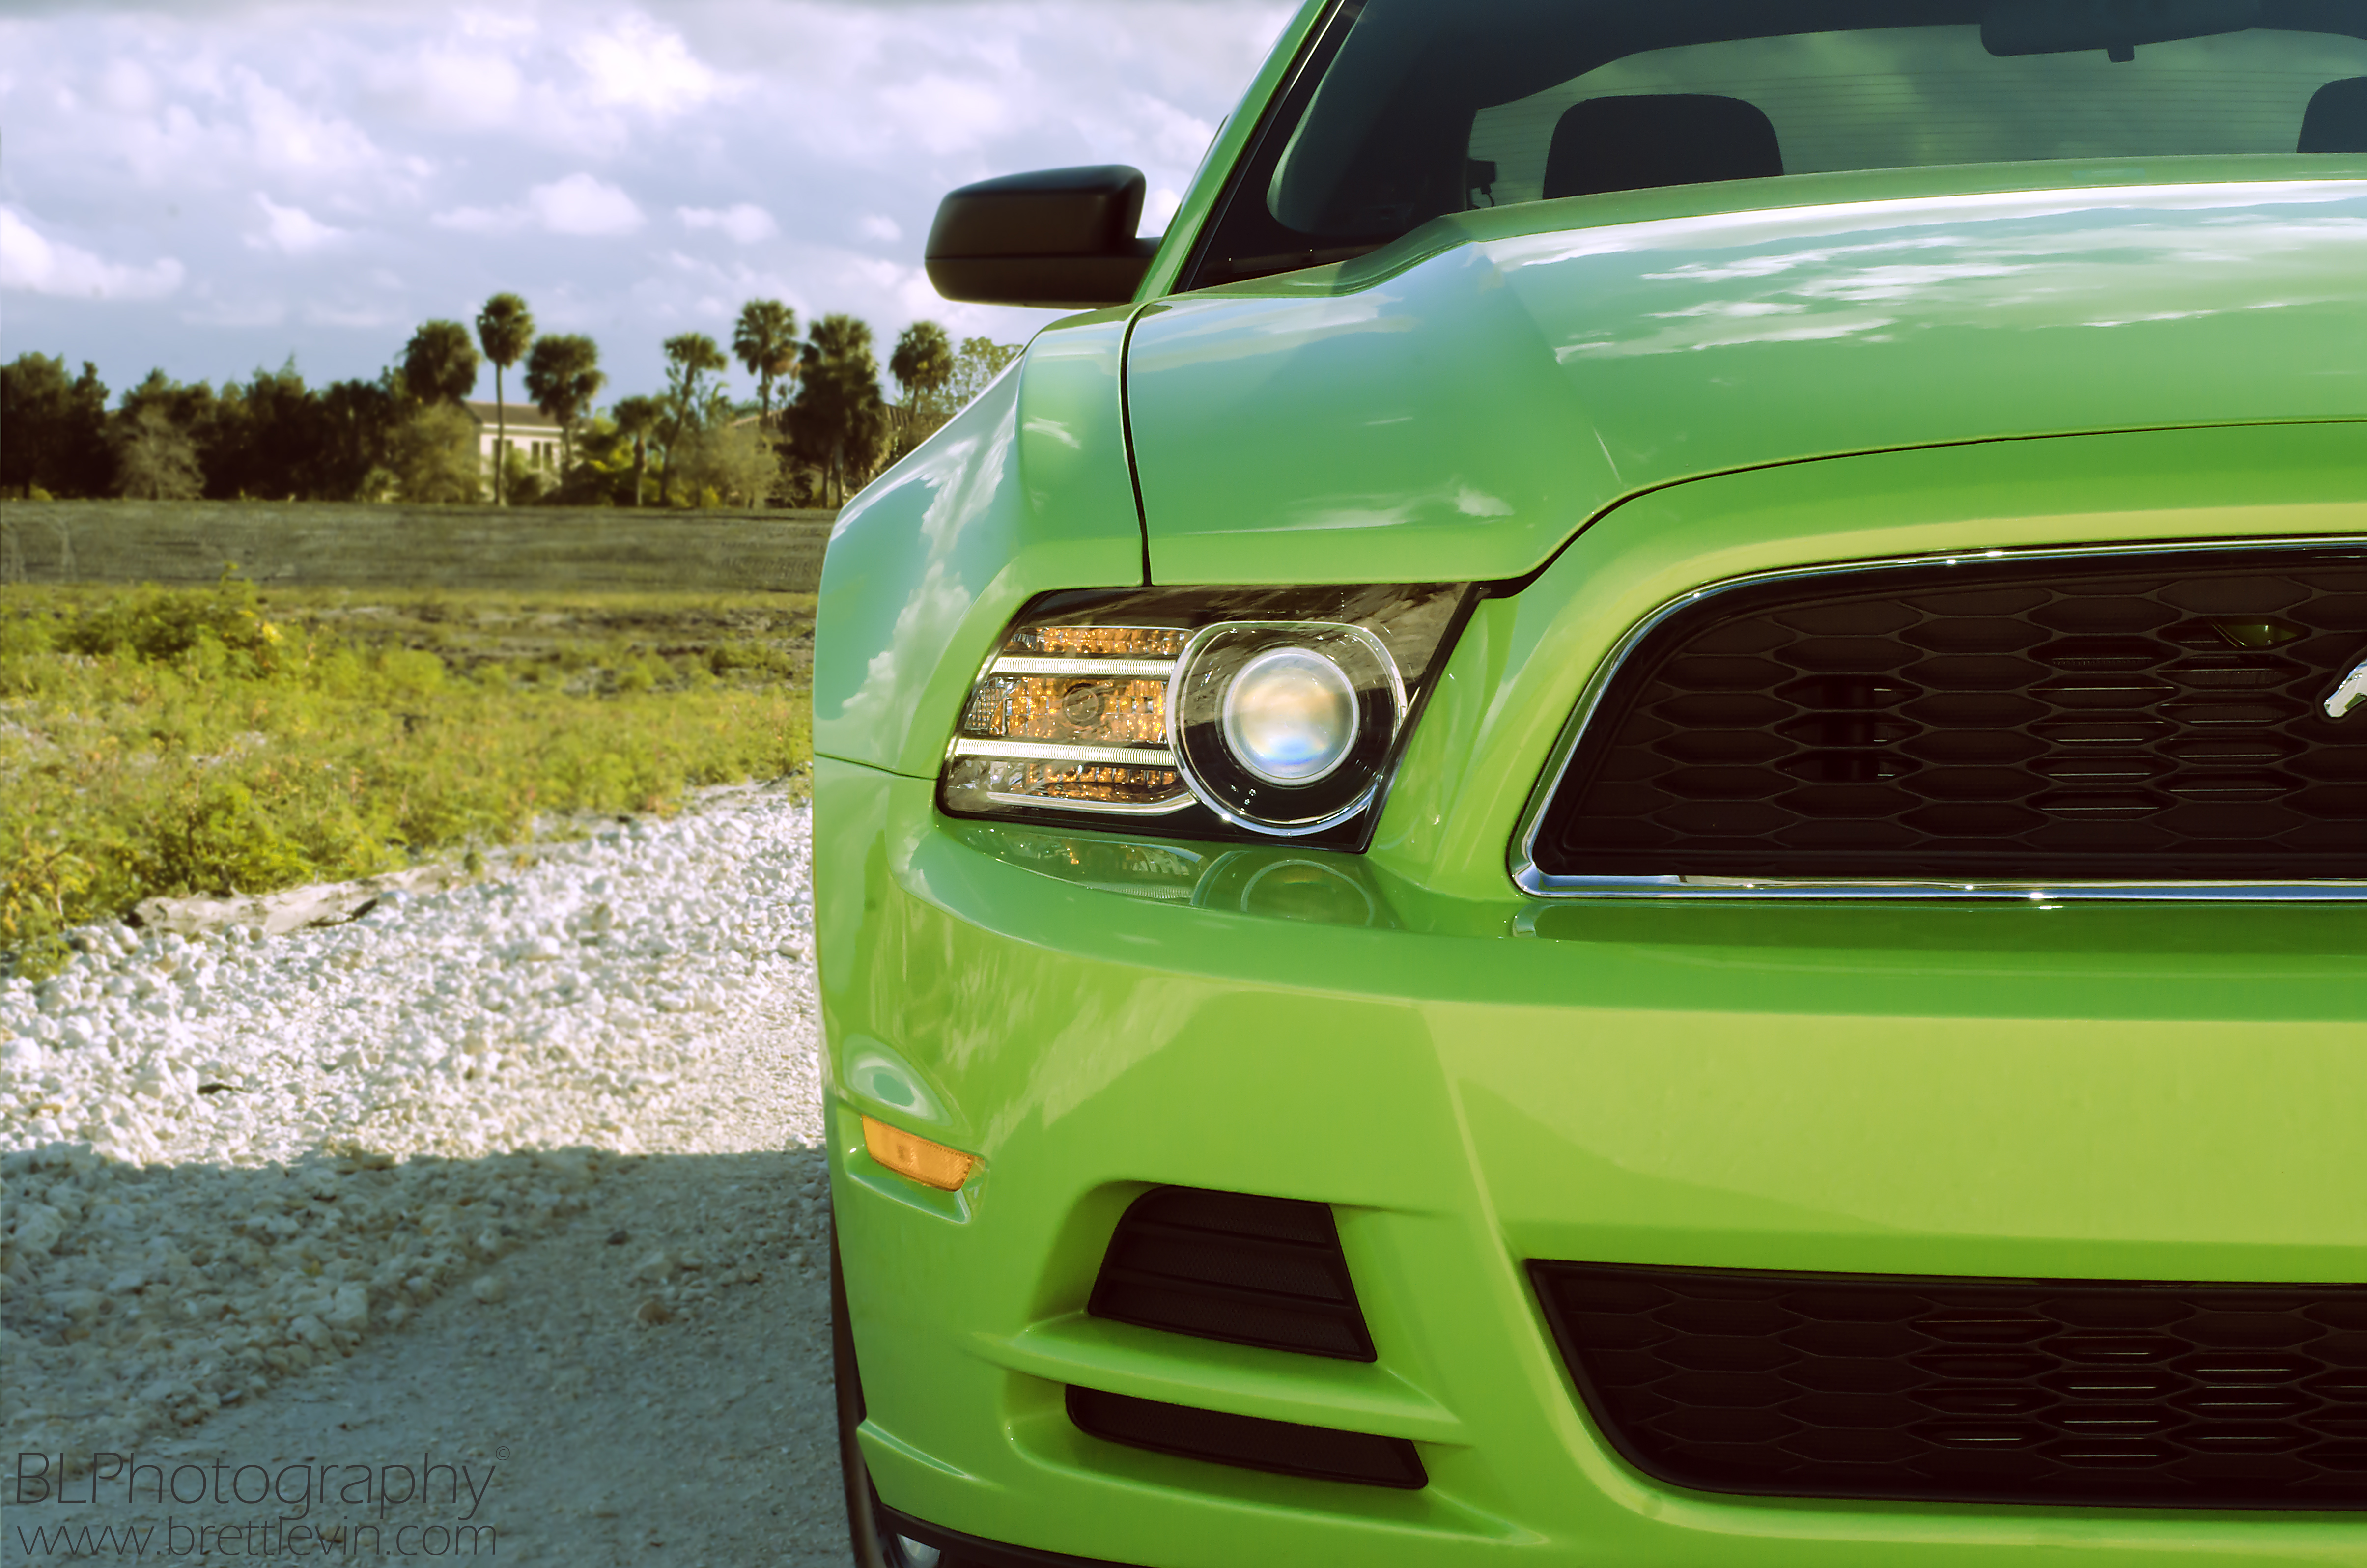 ford mustang, sports, cars, green, front view, sports car, headlight images